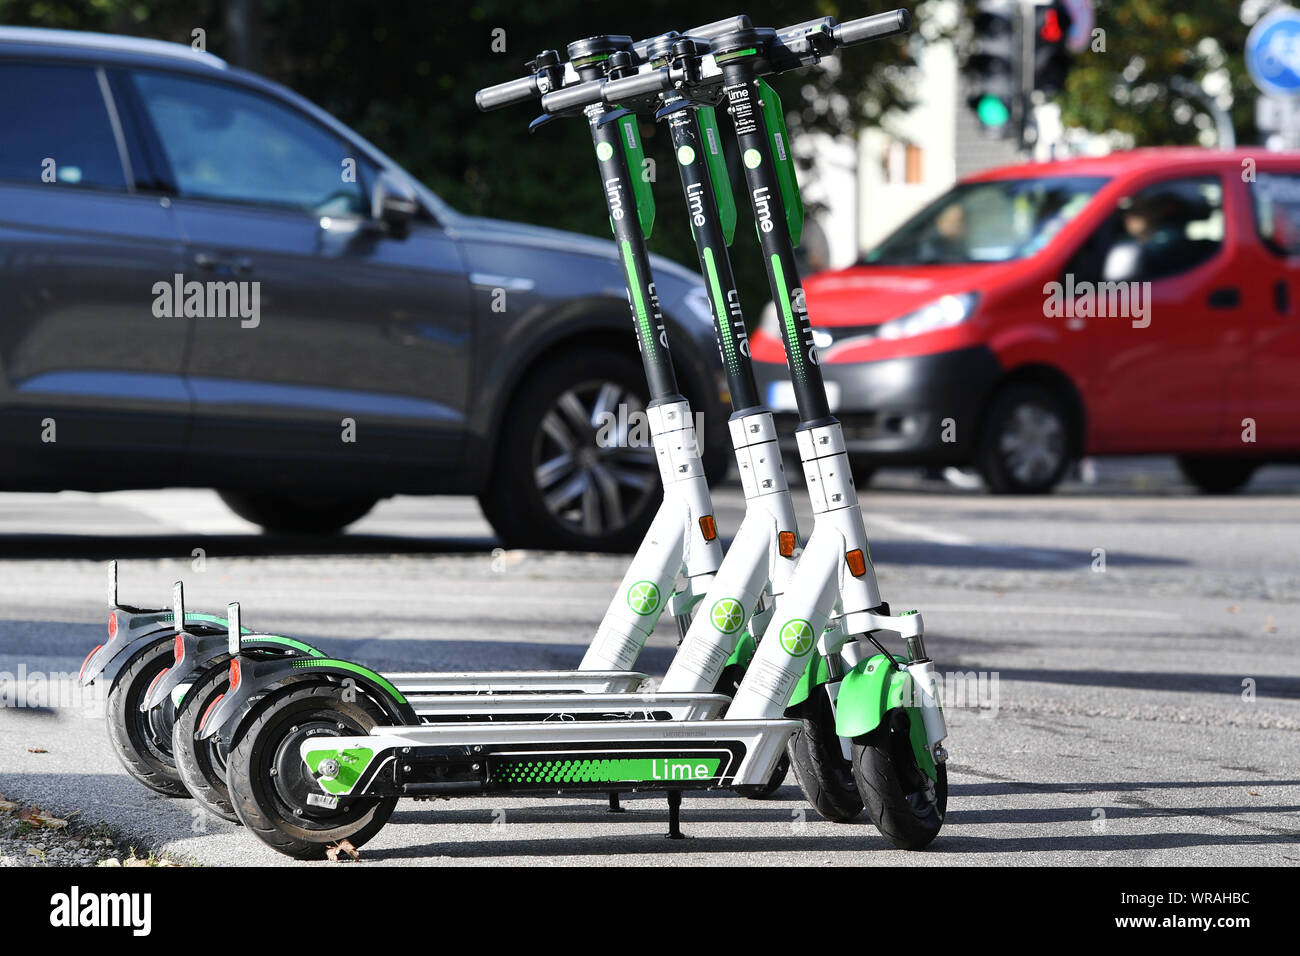 Munich, Deutschland. 10th Sep, 2019. Three e-scooters are arranged side by  side - in the background cars drive. LimeBike, Lime Bike US e-scooter  rental company. E-scooter, e-scooter in the city center of